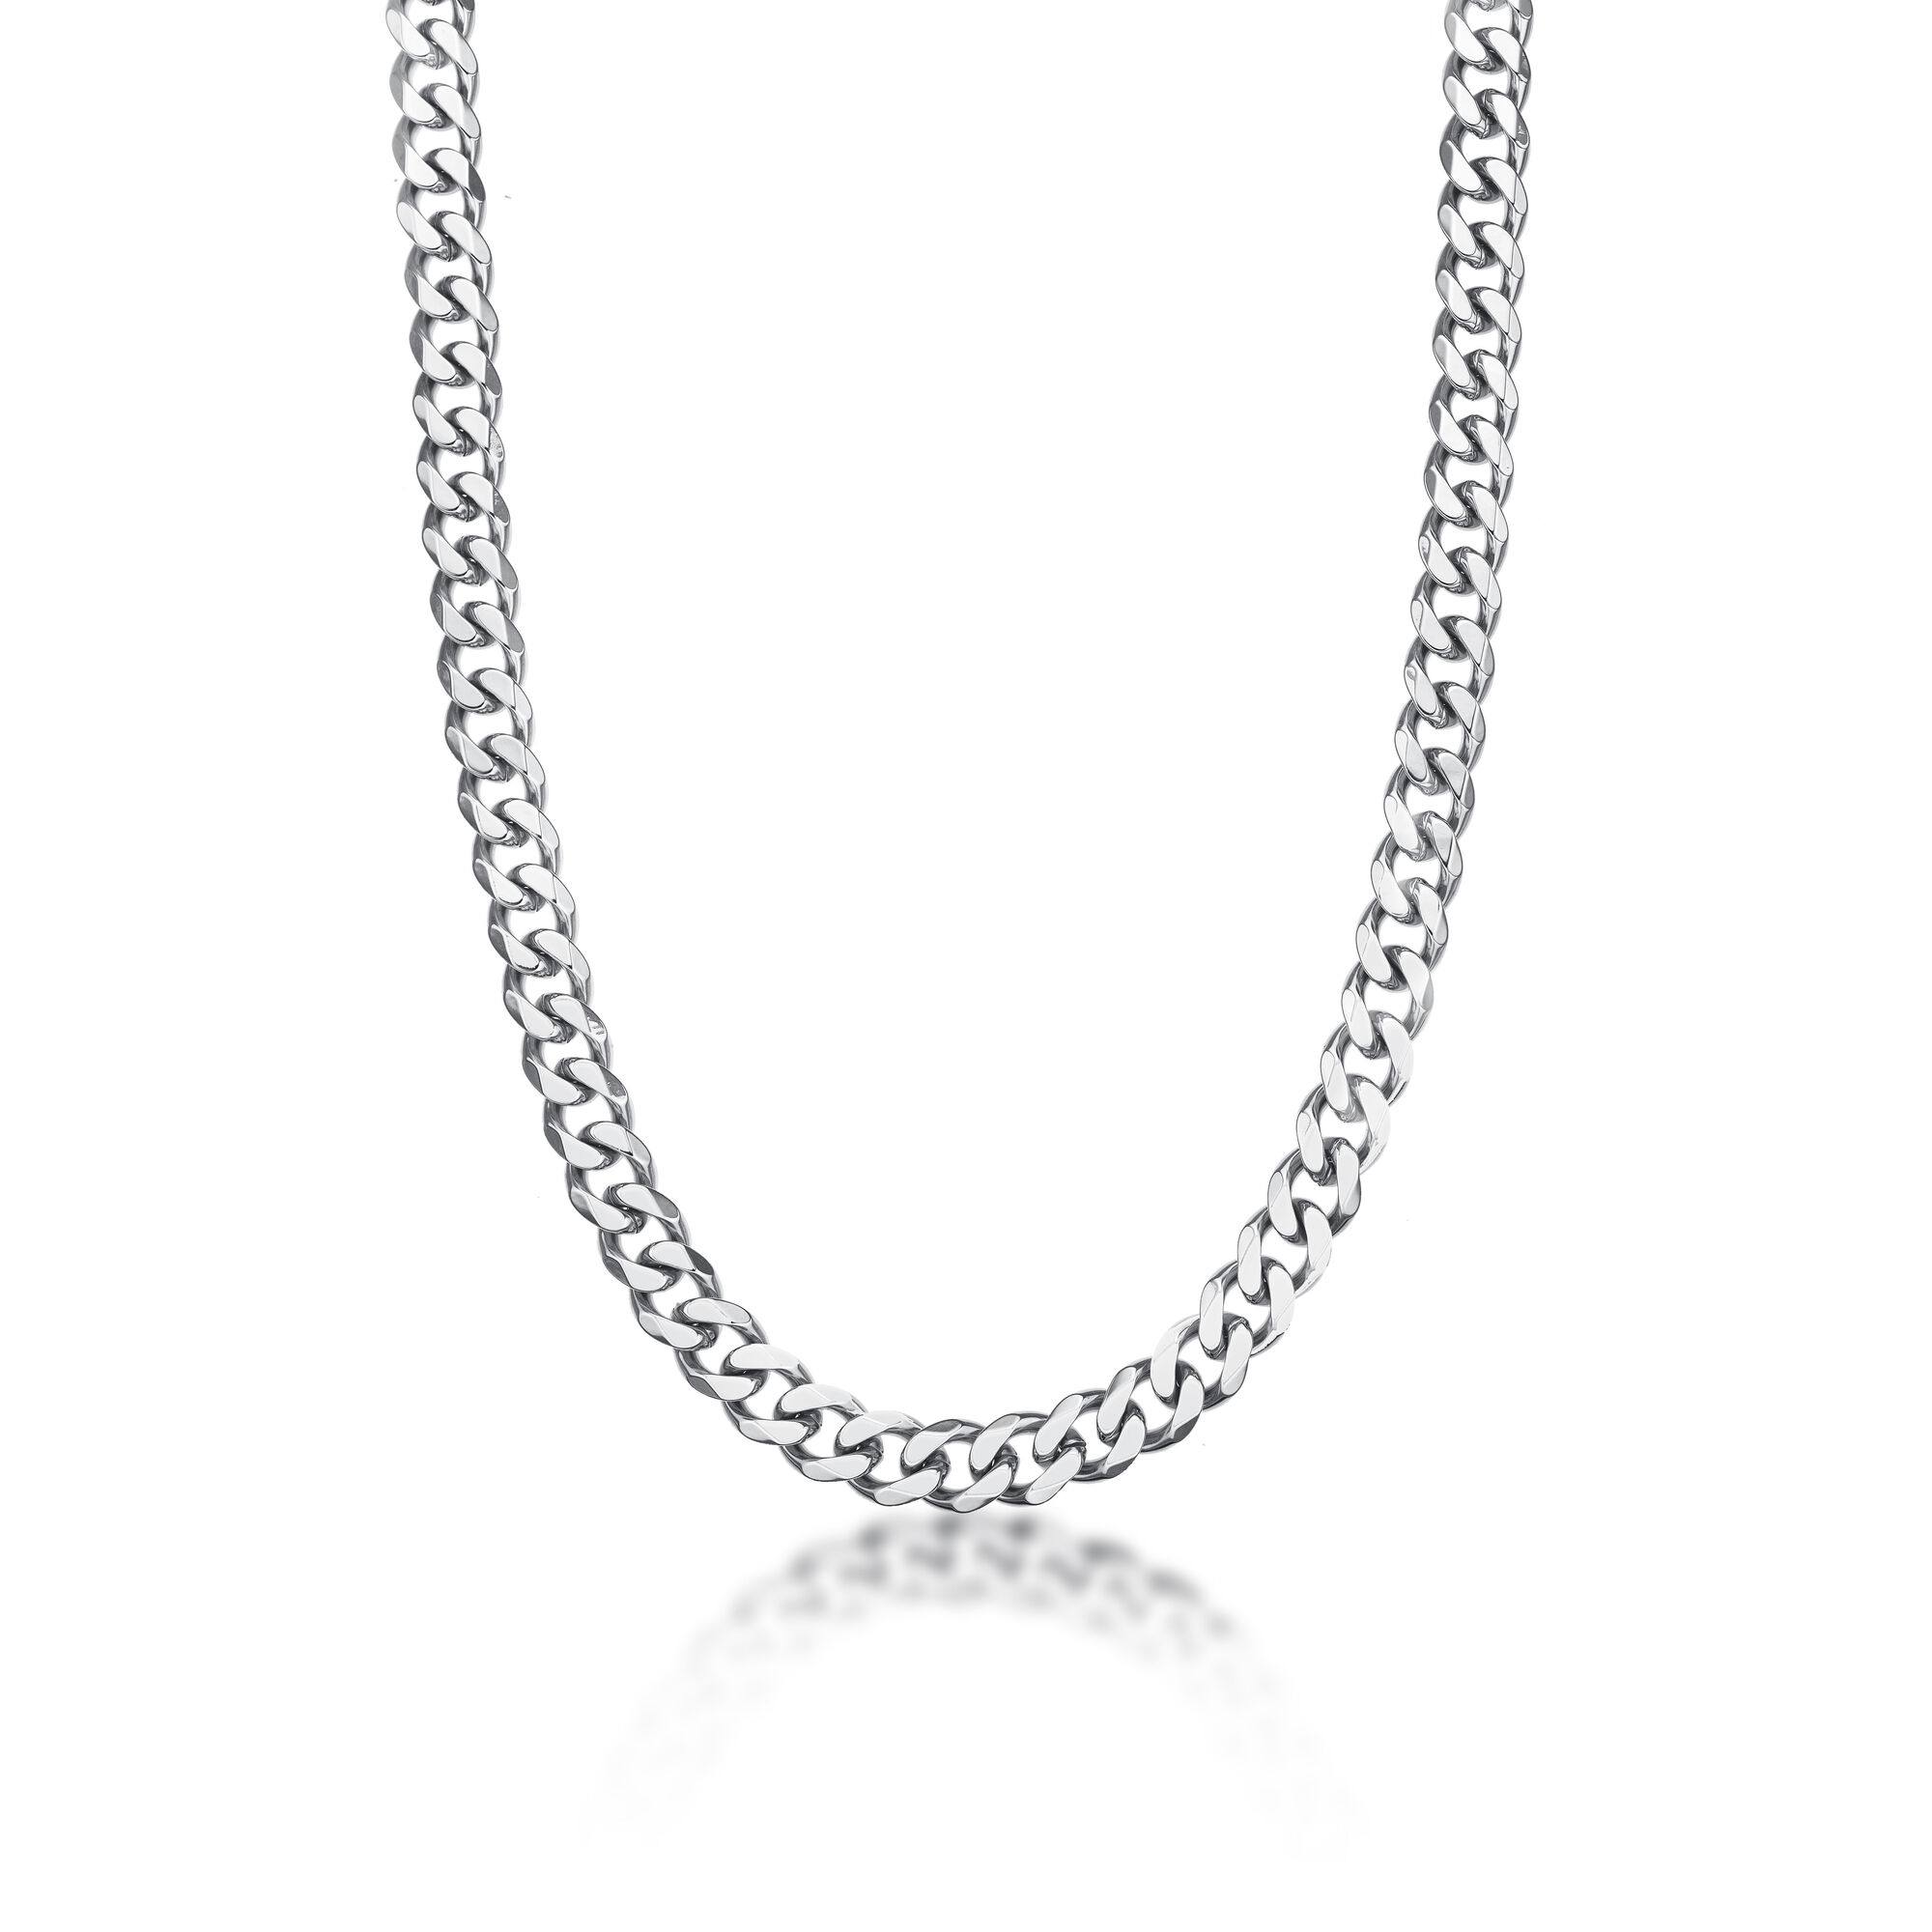 Men's Stainless Steel 10MM Curb Chain Necklace - 22 Inch | Metro Jewelry